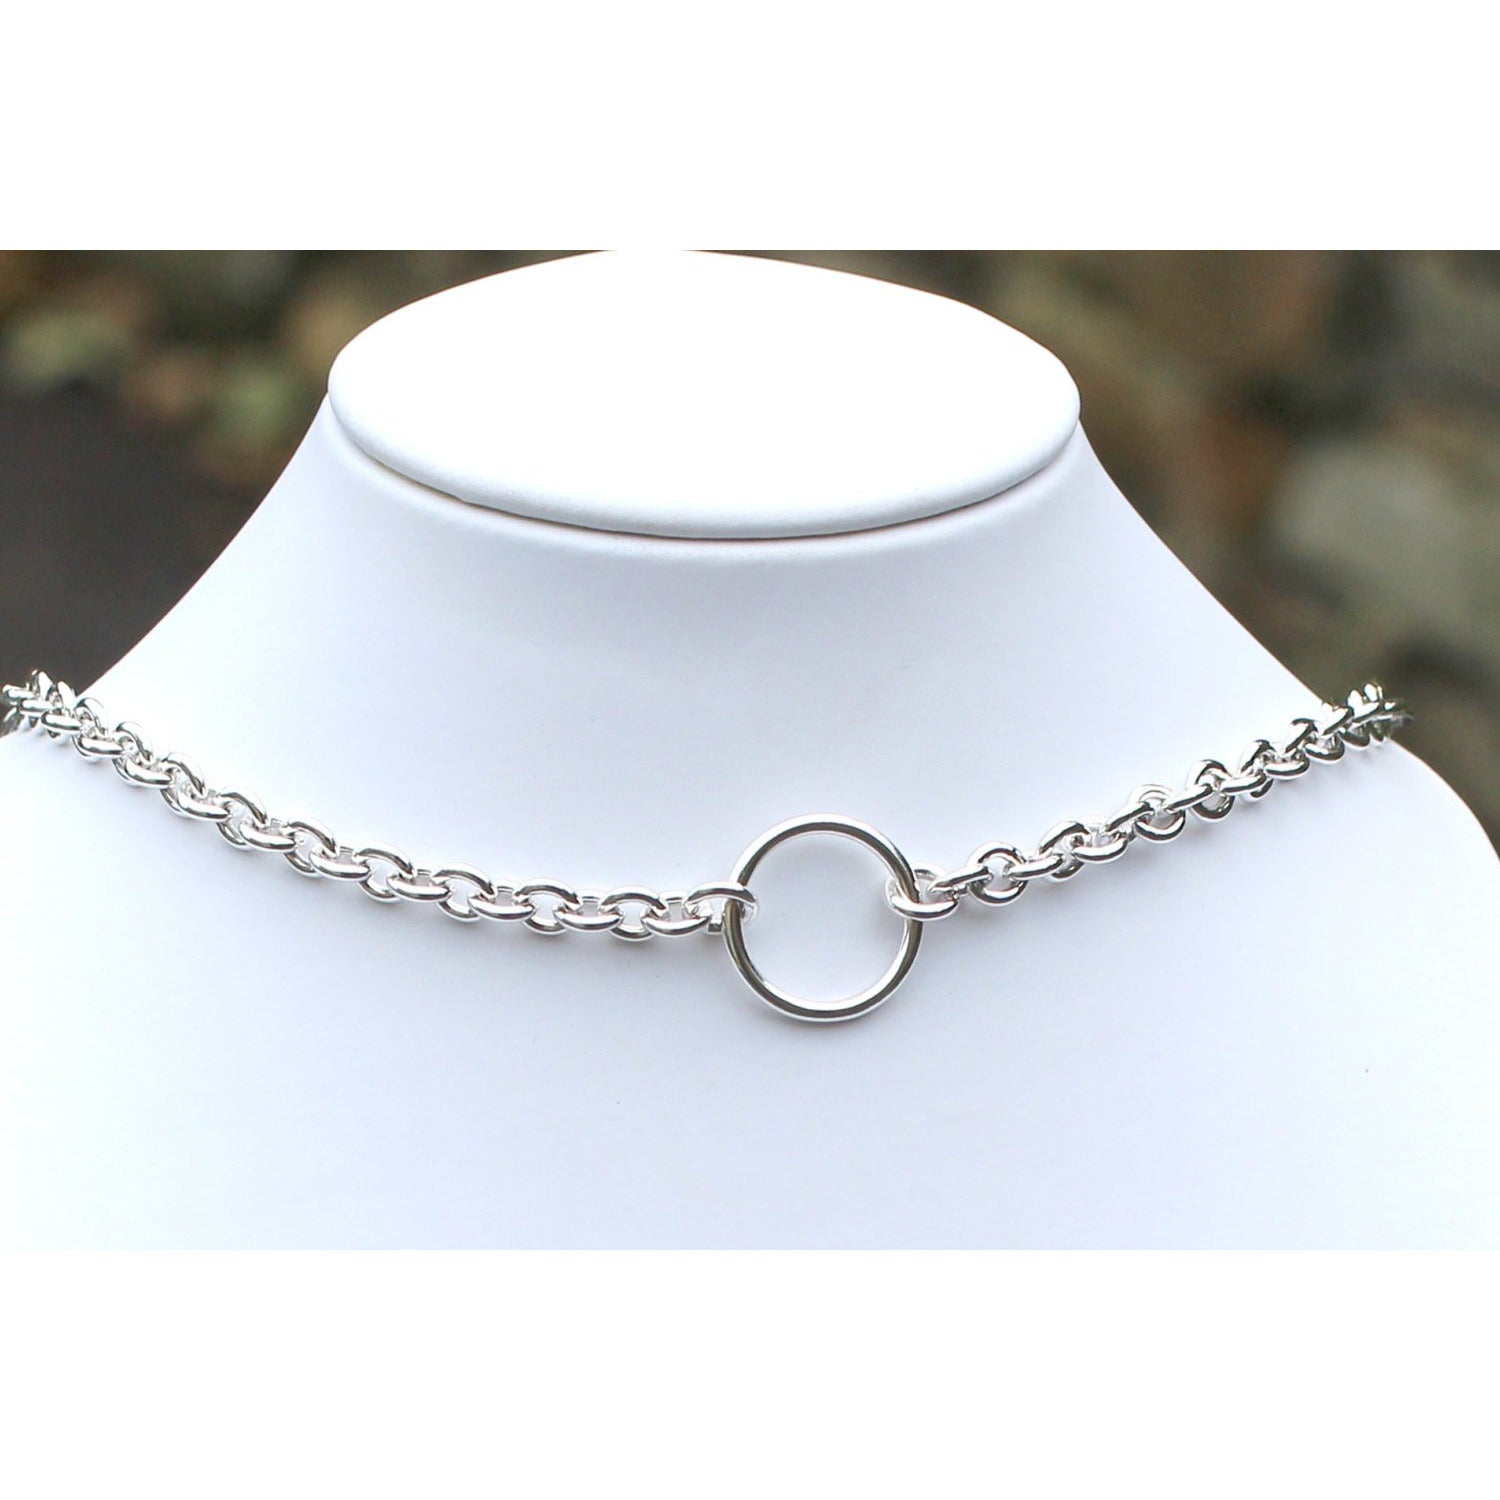 Handmade Sterling Silver BDSM Day Collar with Classic O Ring and Medium Chain